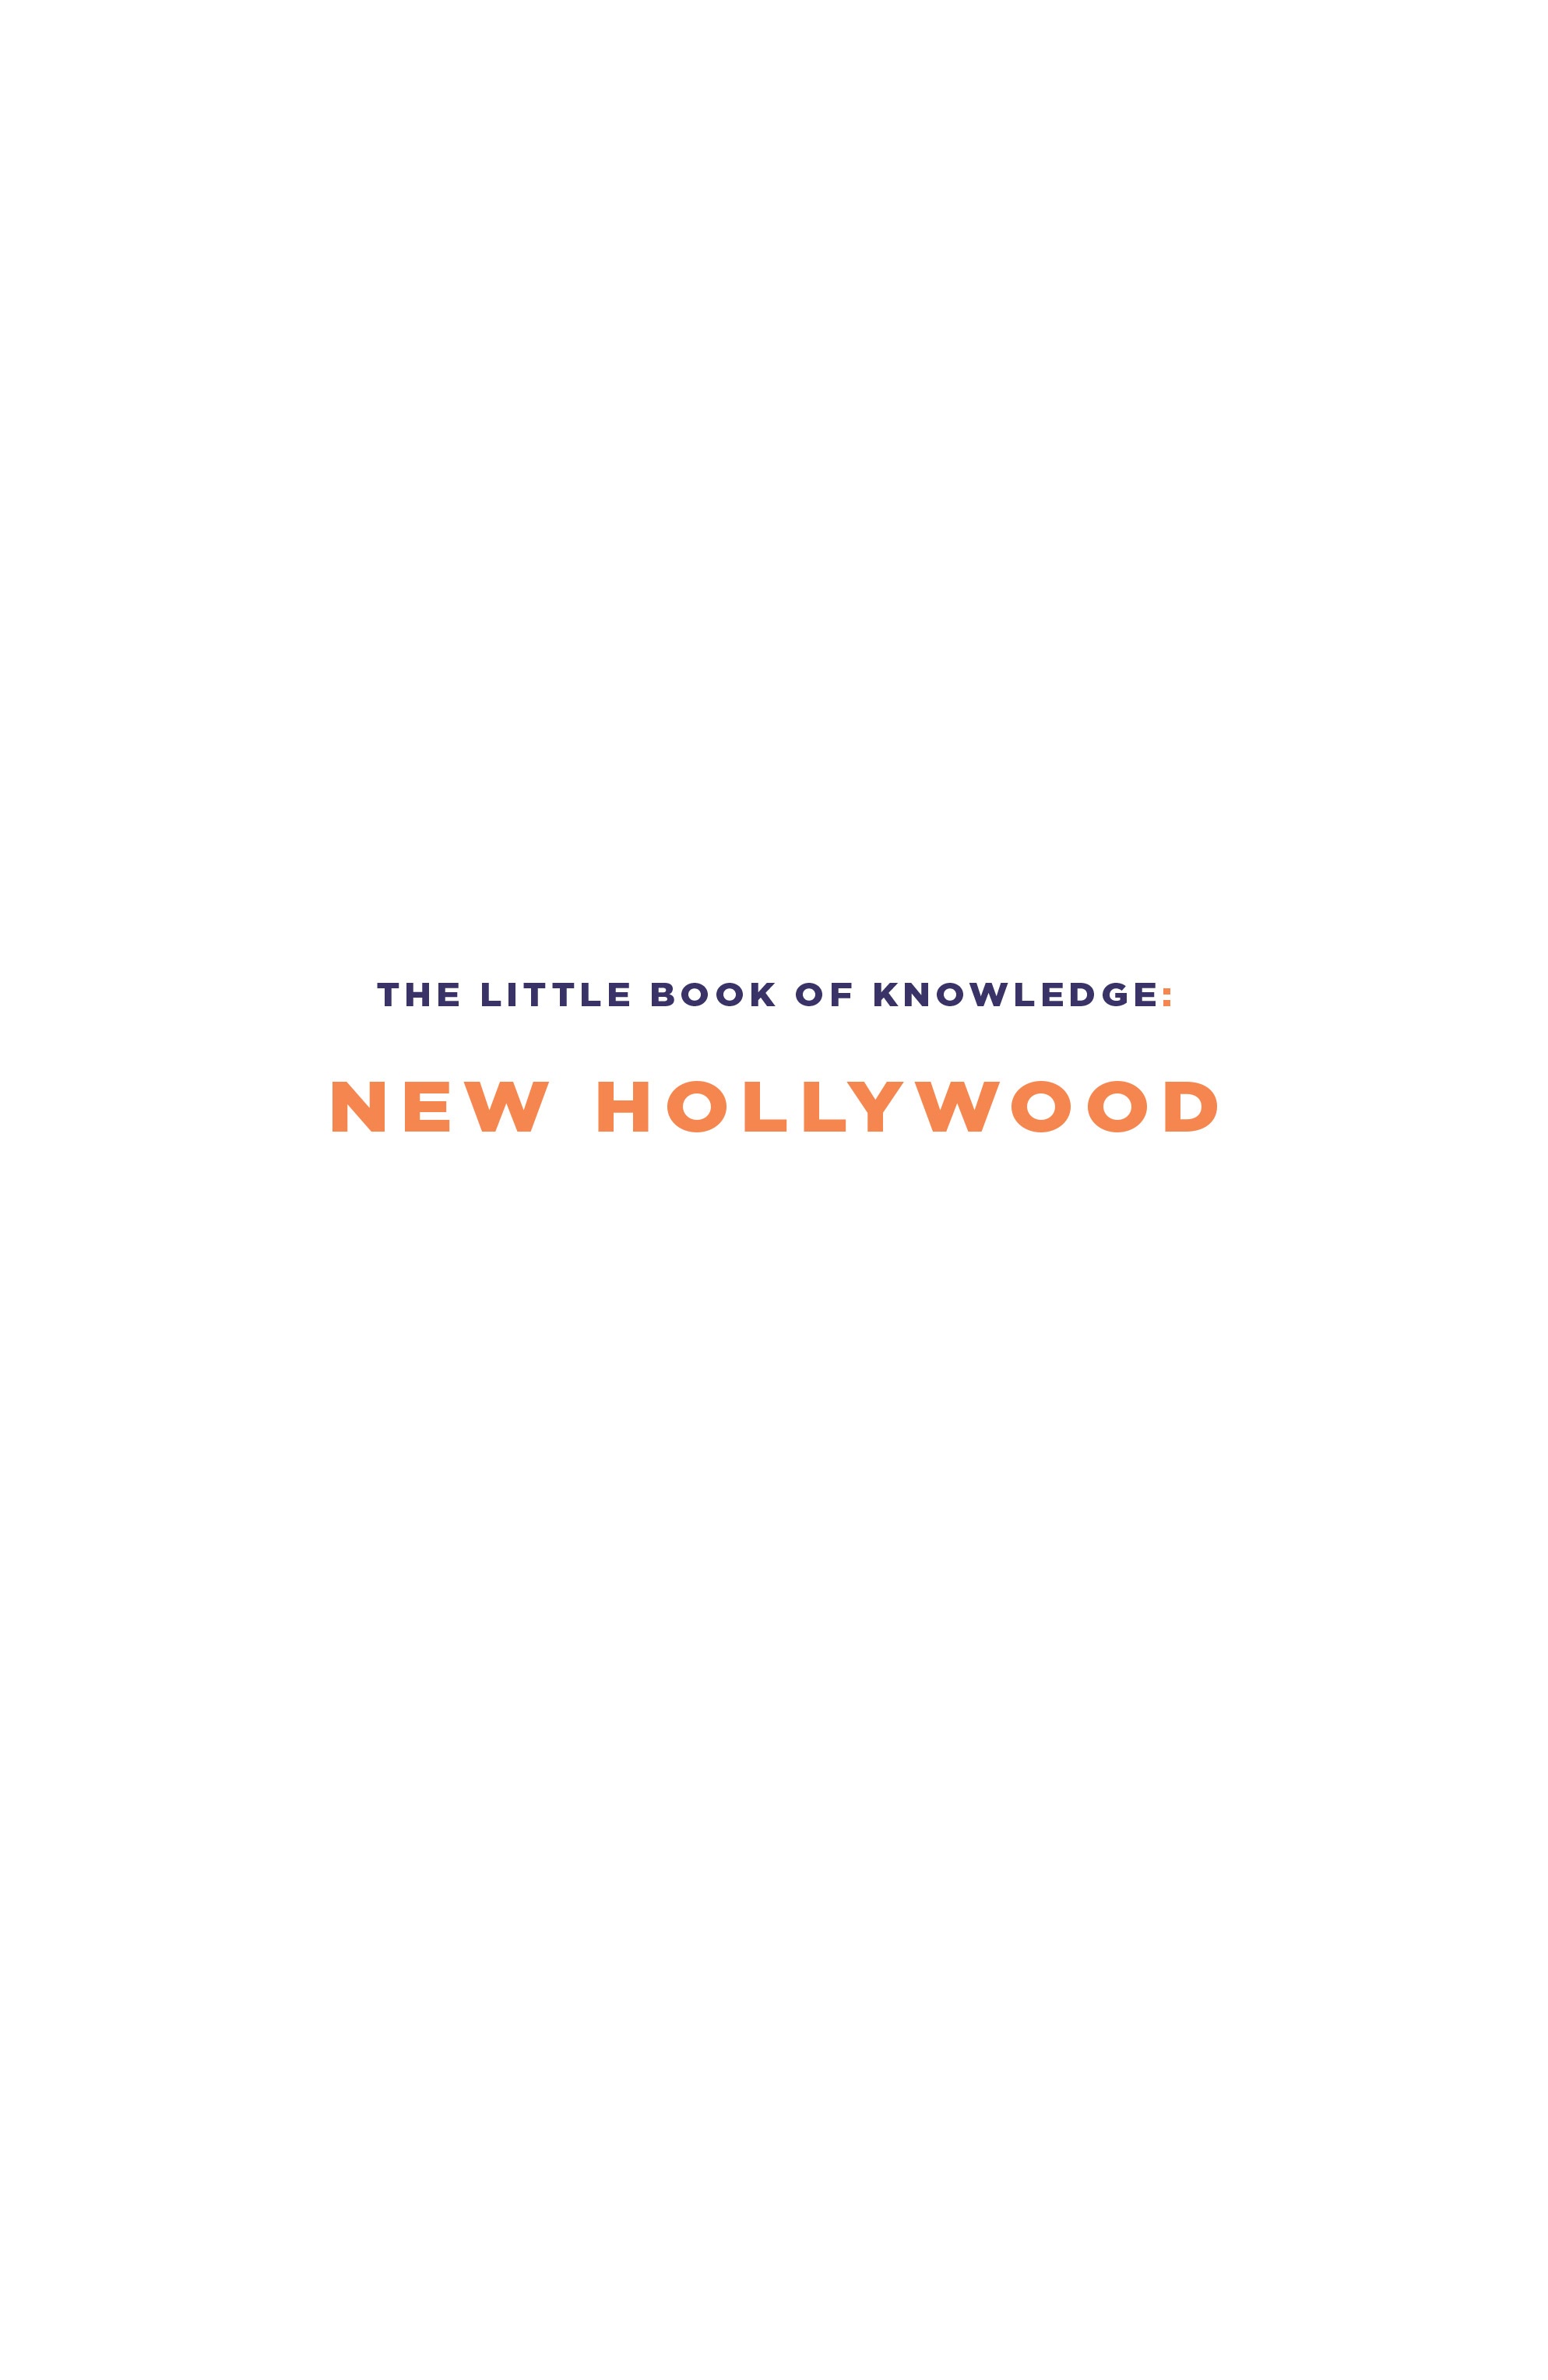 Read online The Little Book of Knowledge: New Hollywood comic -  Issue # TPB - 3